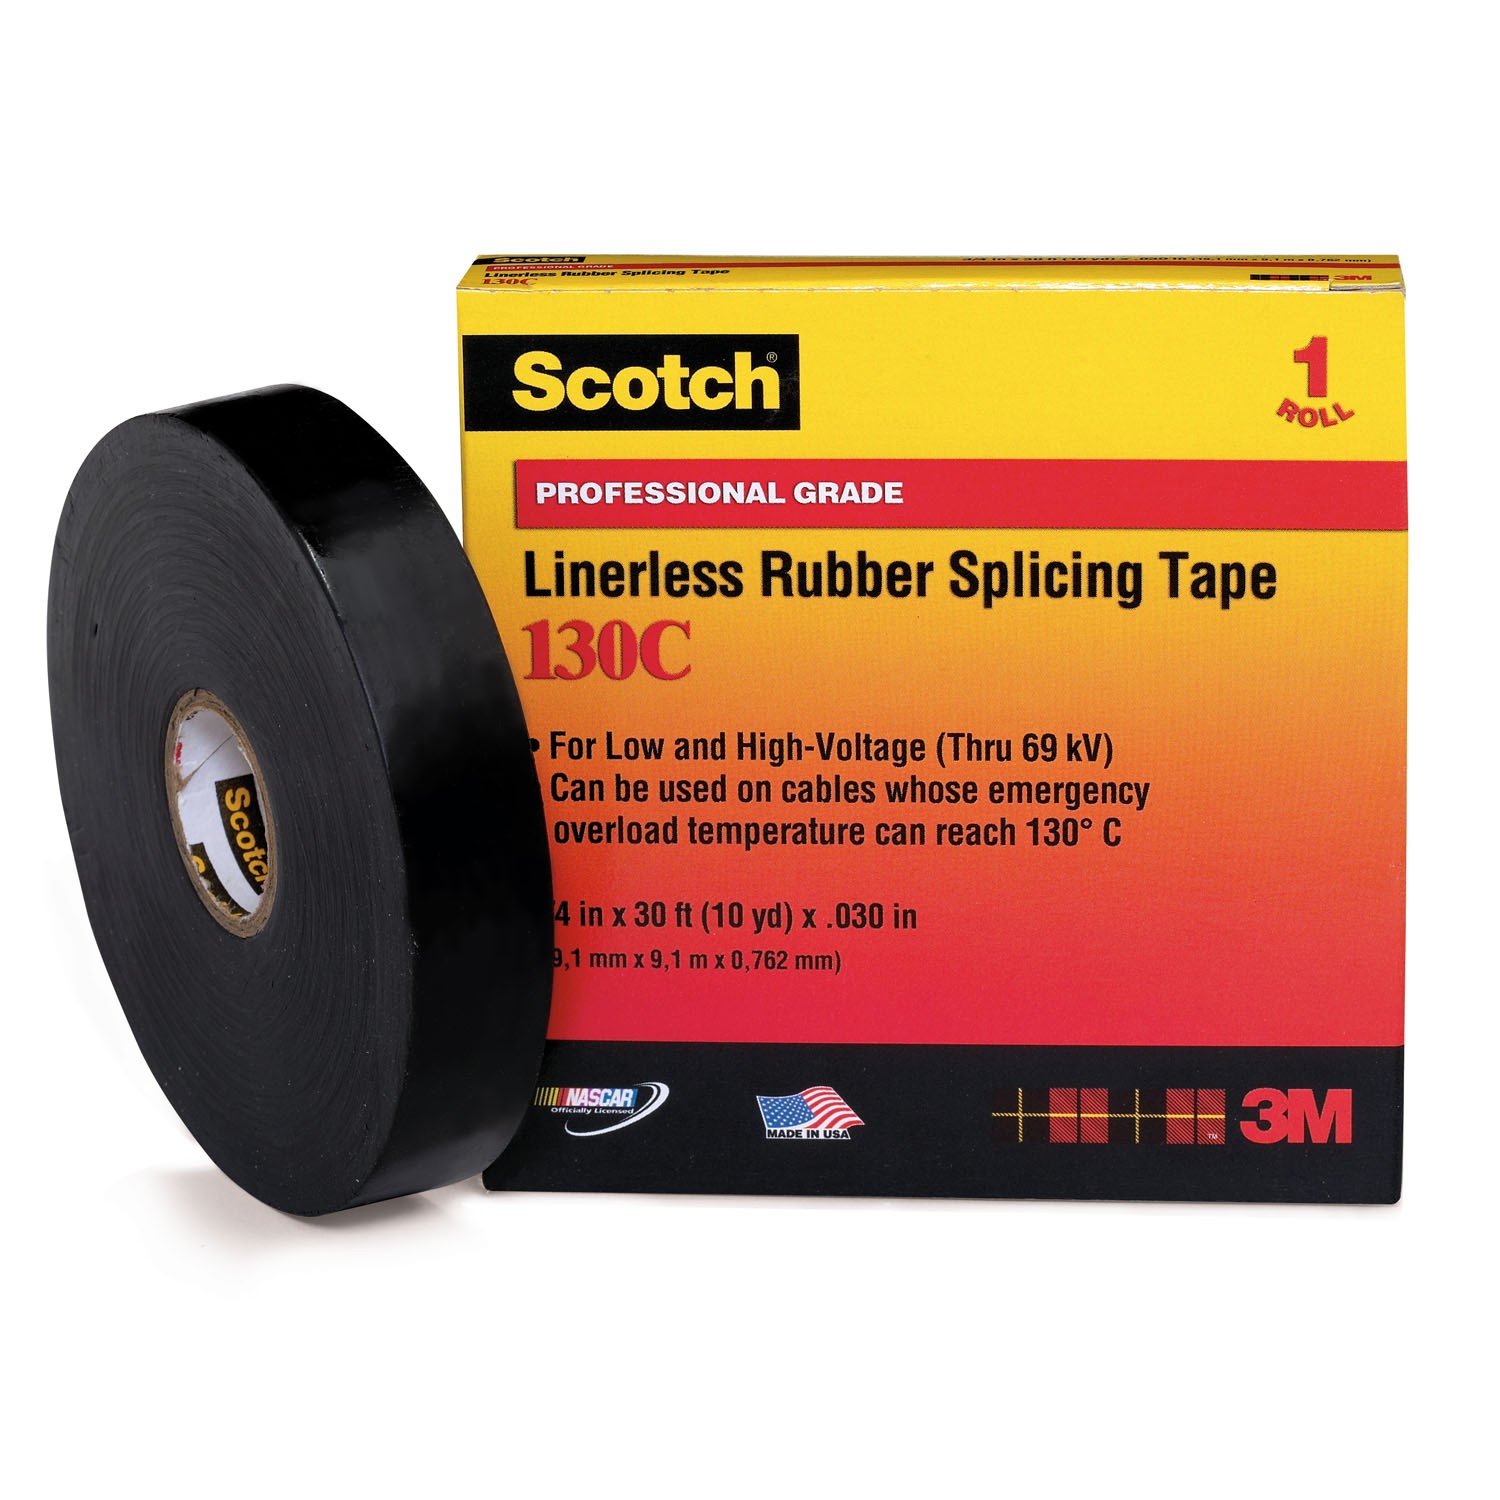 3m electrical putty tape